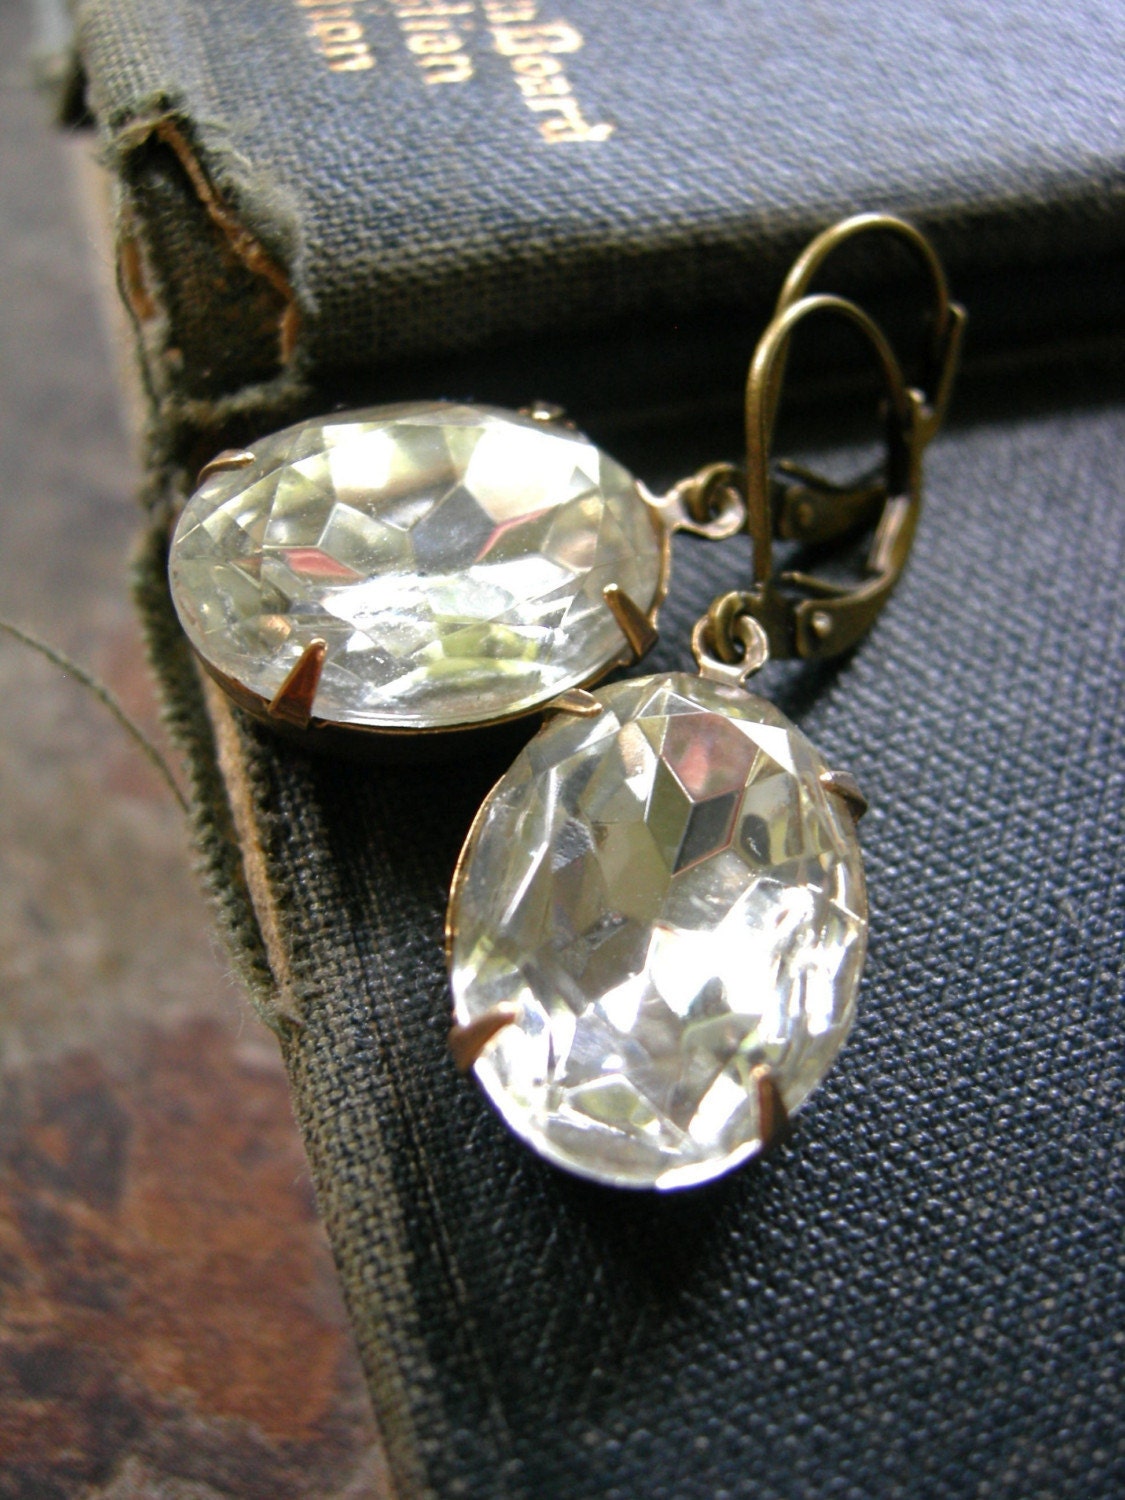 SPRING CLEARANCE - Hollywood Luxe Earrings (Crystal Clear Ovals)